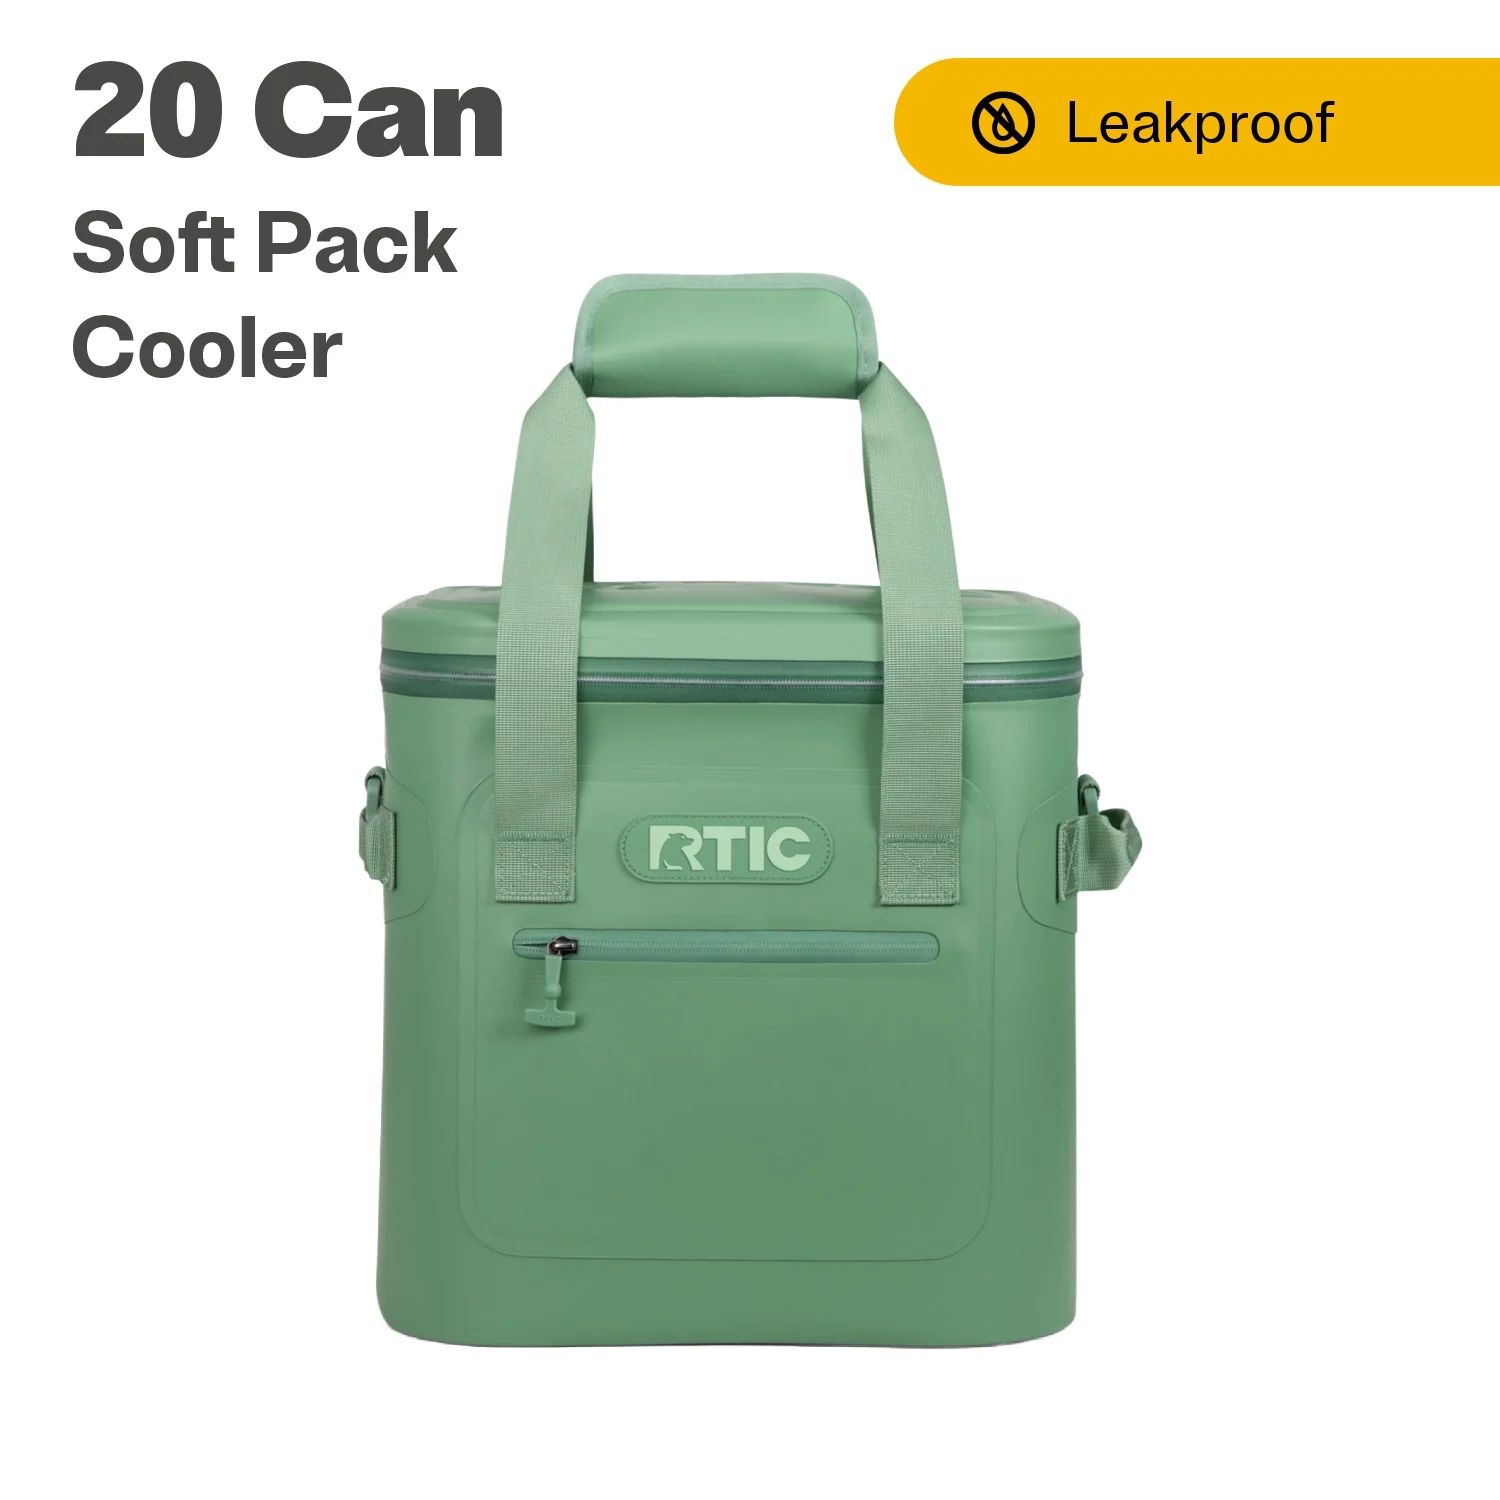 RTIC 20 Can Soft Pack Cooler, Leakproof Ice Chest Cooler with Waterproof Zipper, Sage | Walmart (US)